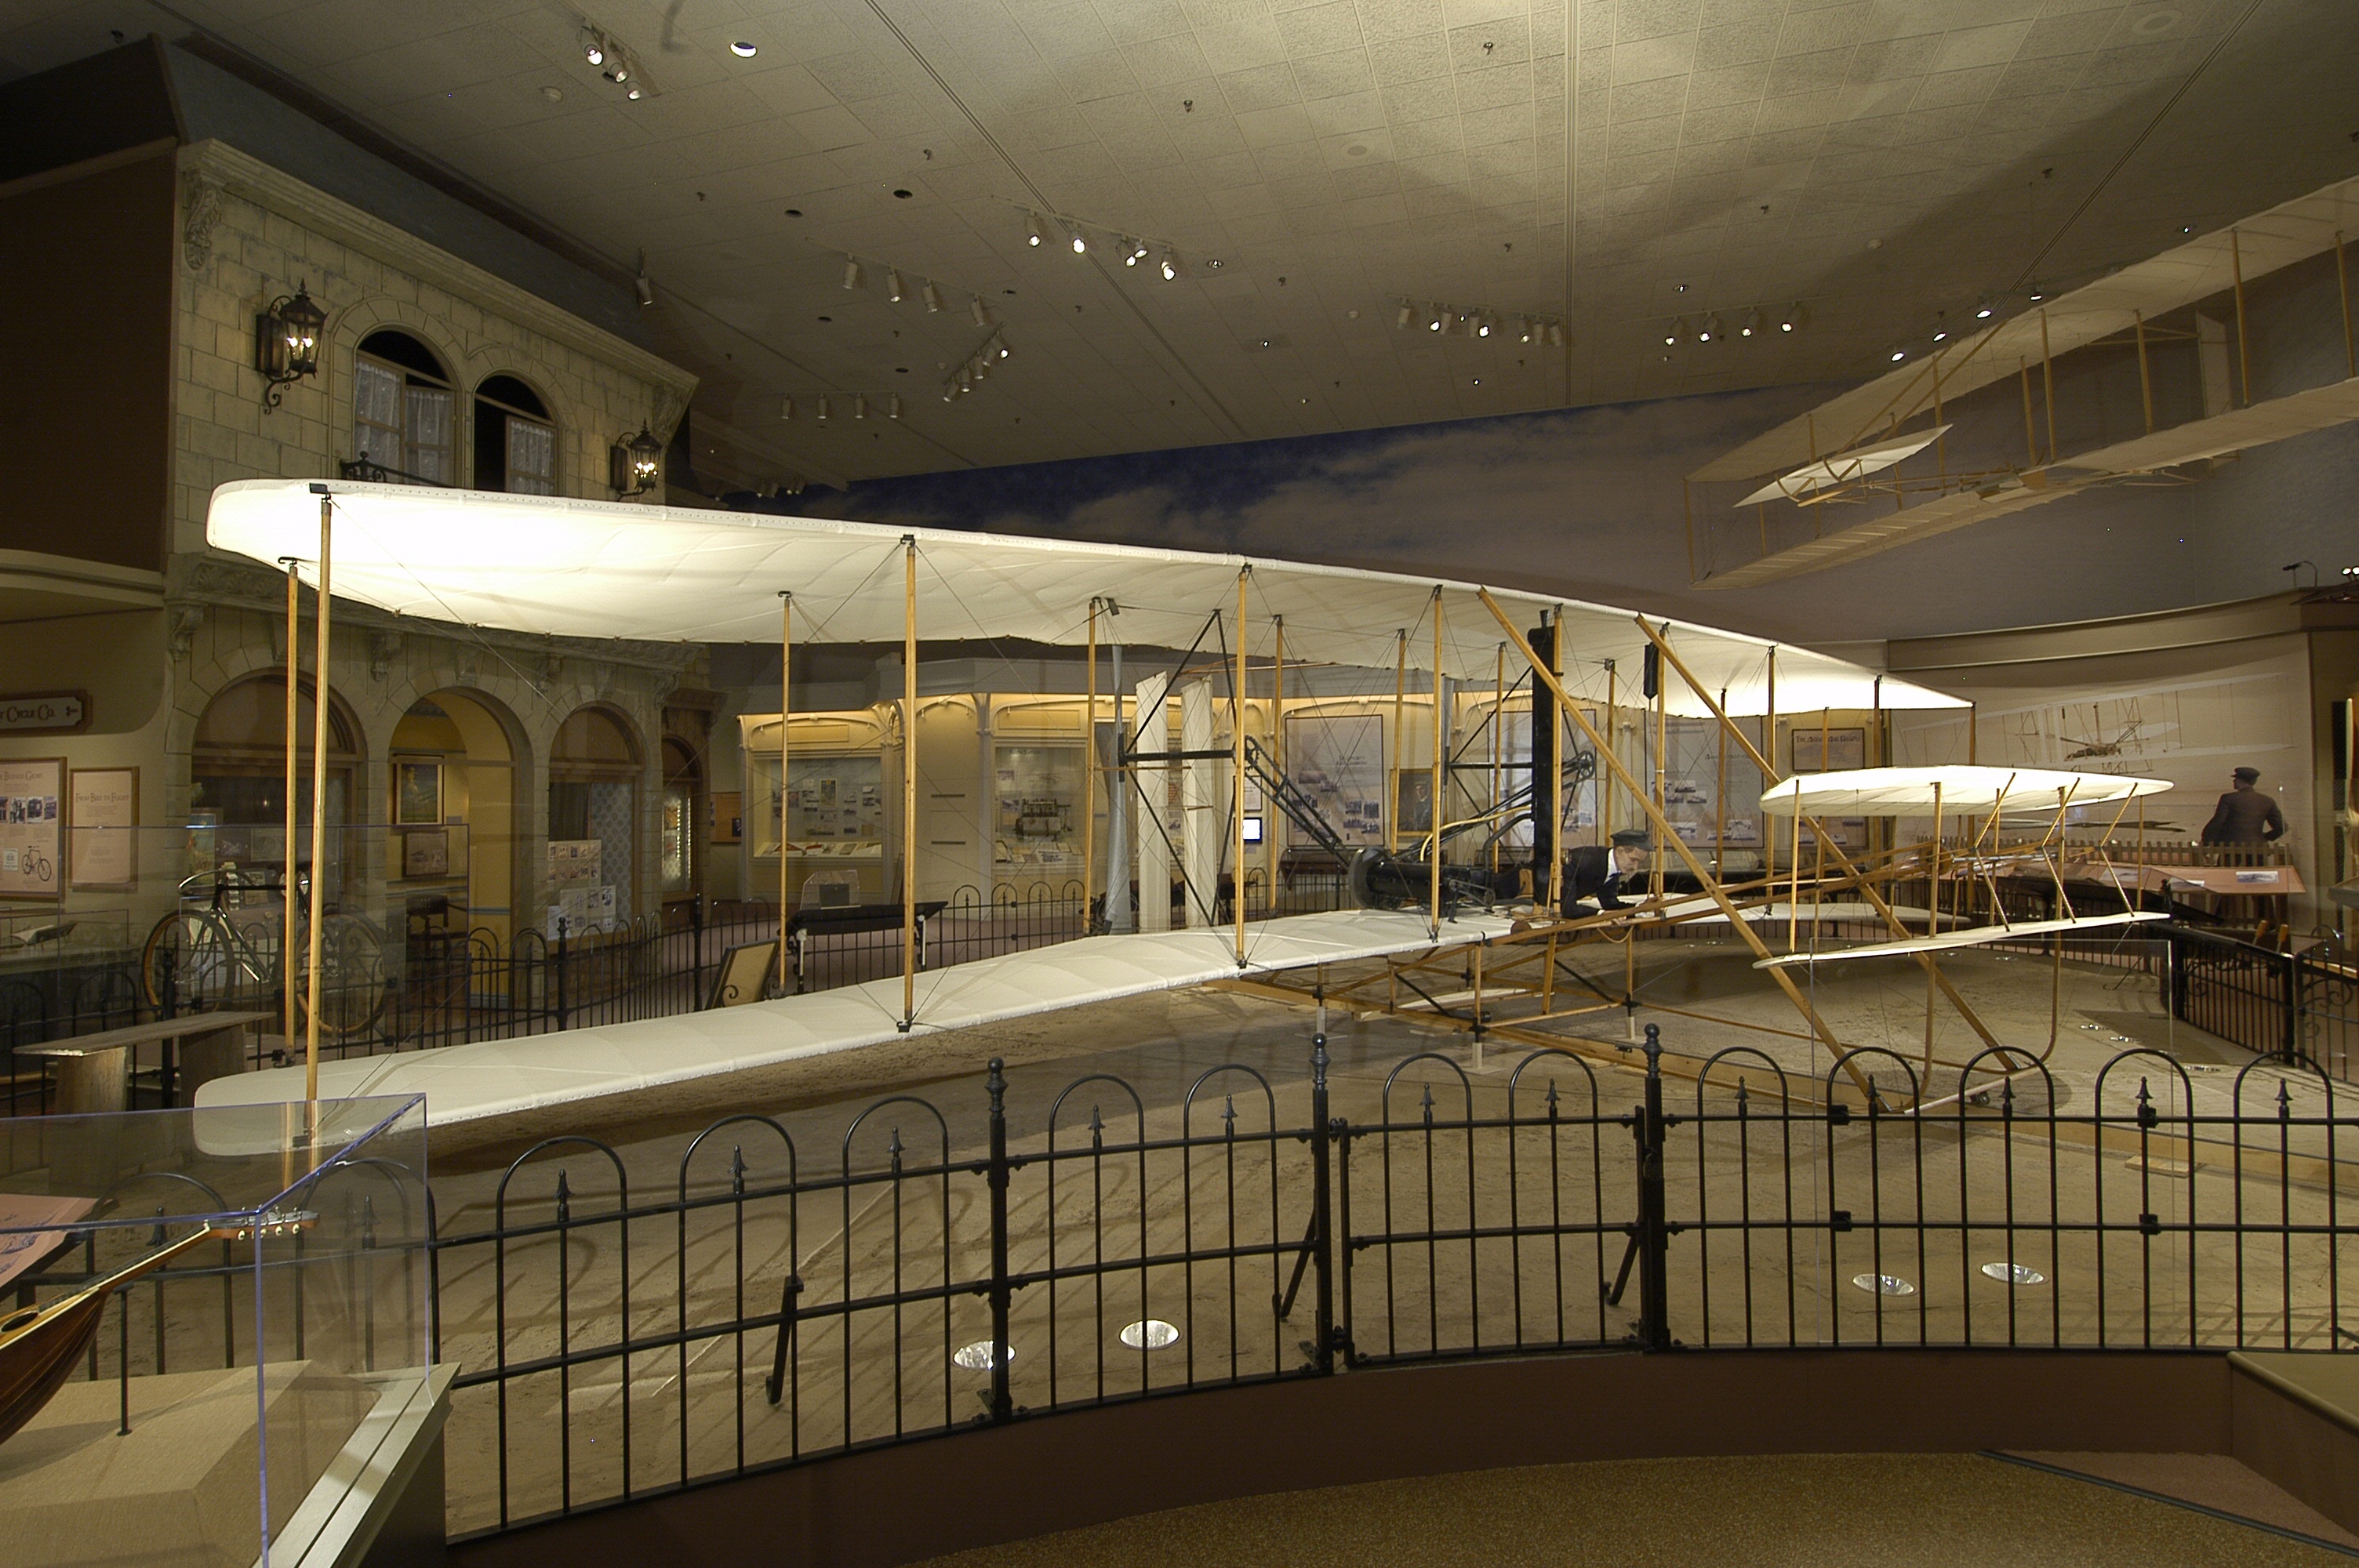 The 1903 Wright Flyer at the Smithsonian Institution. (Photo by Eric Long, National Air and Space Museum, Smithsonian Institution)